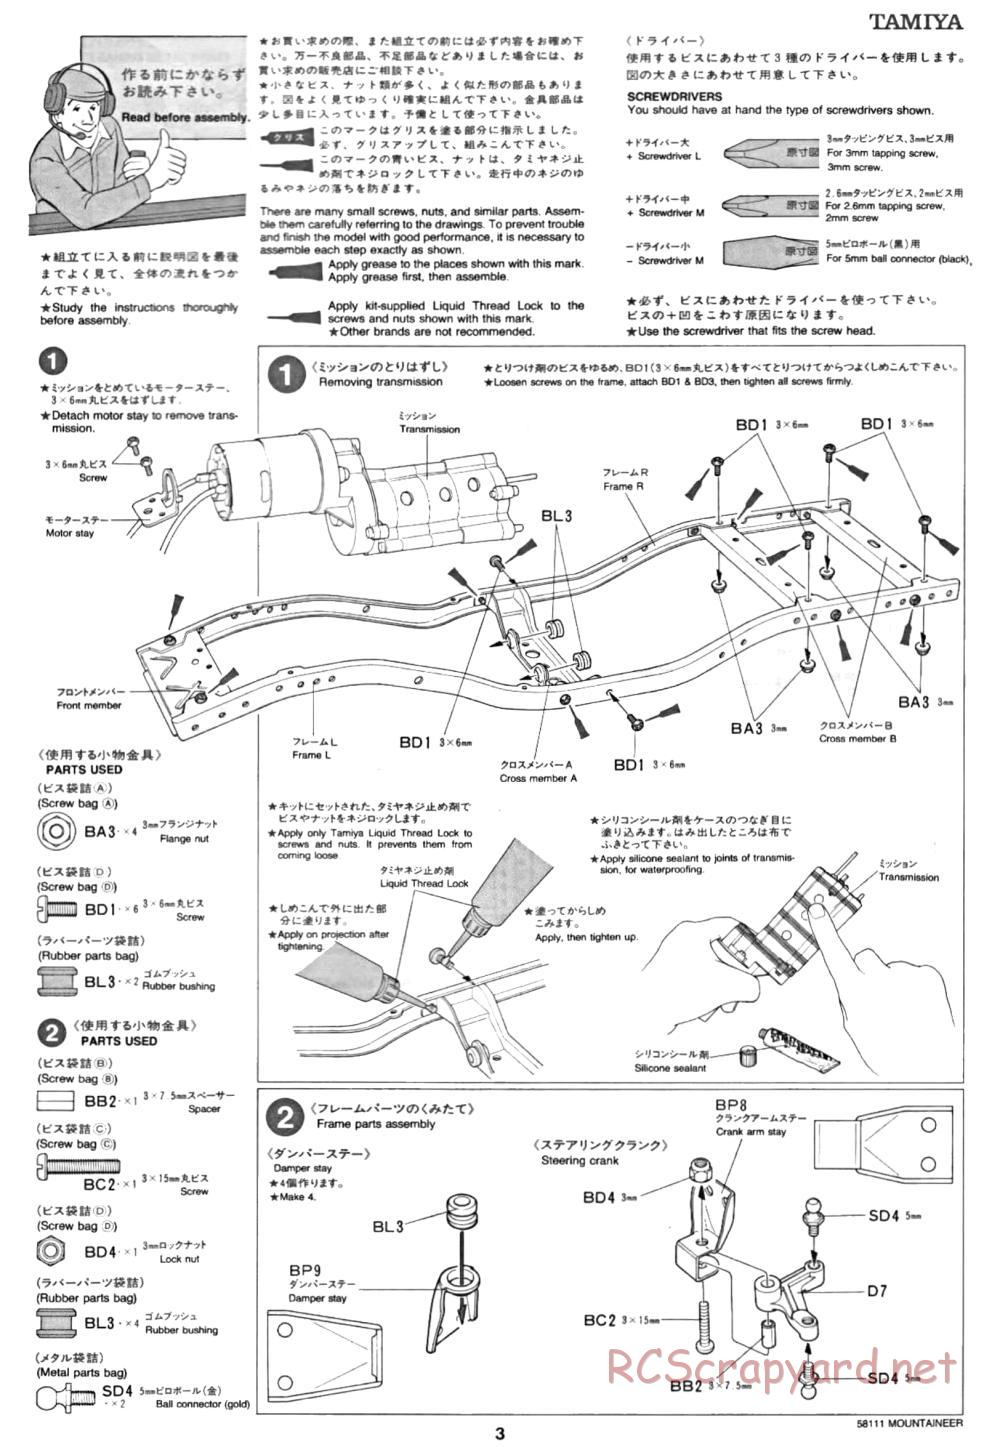 Tamiya - Toyota 4x4 Pick Up Mountaineer Chassis - Manual - Page 3